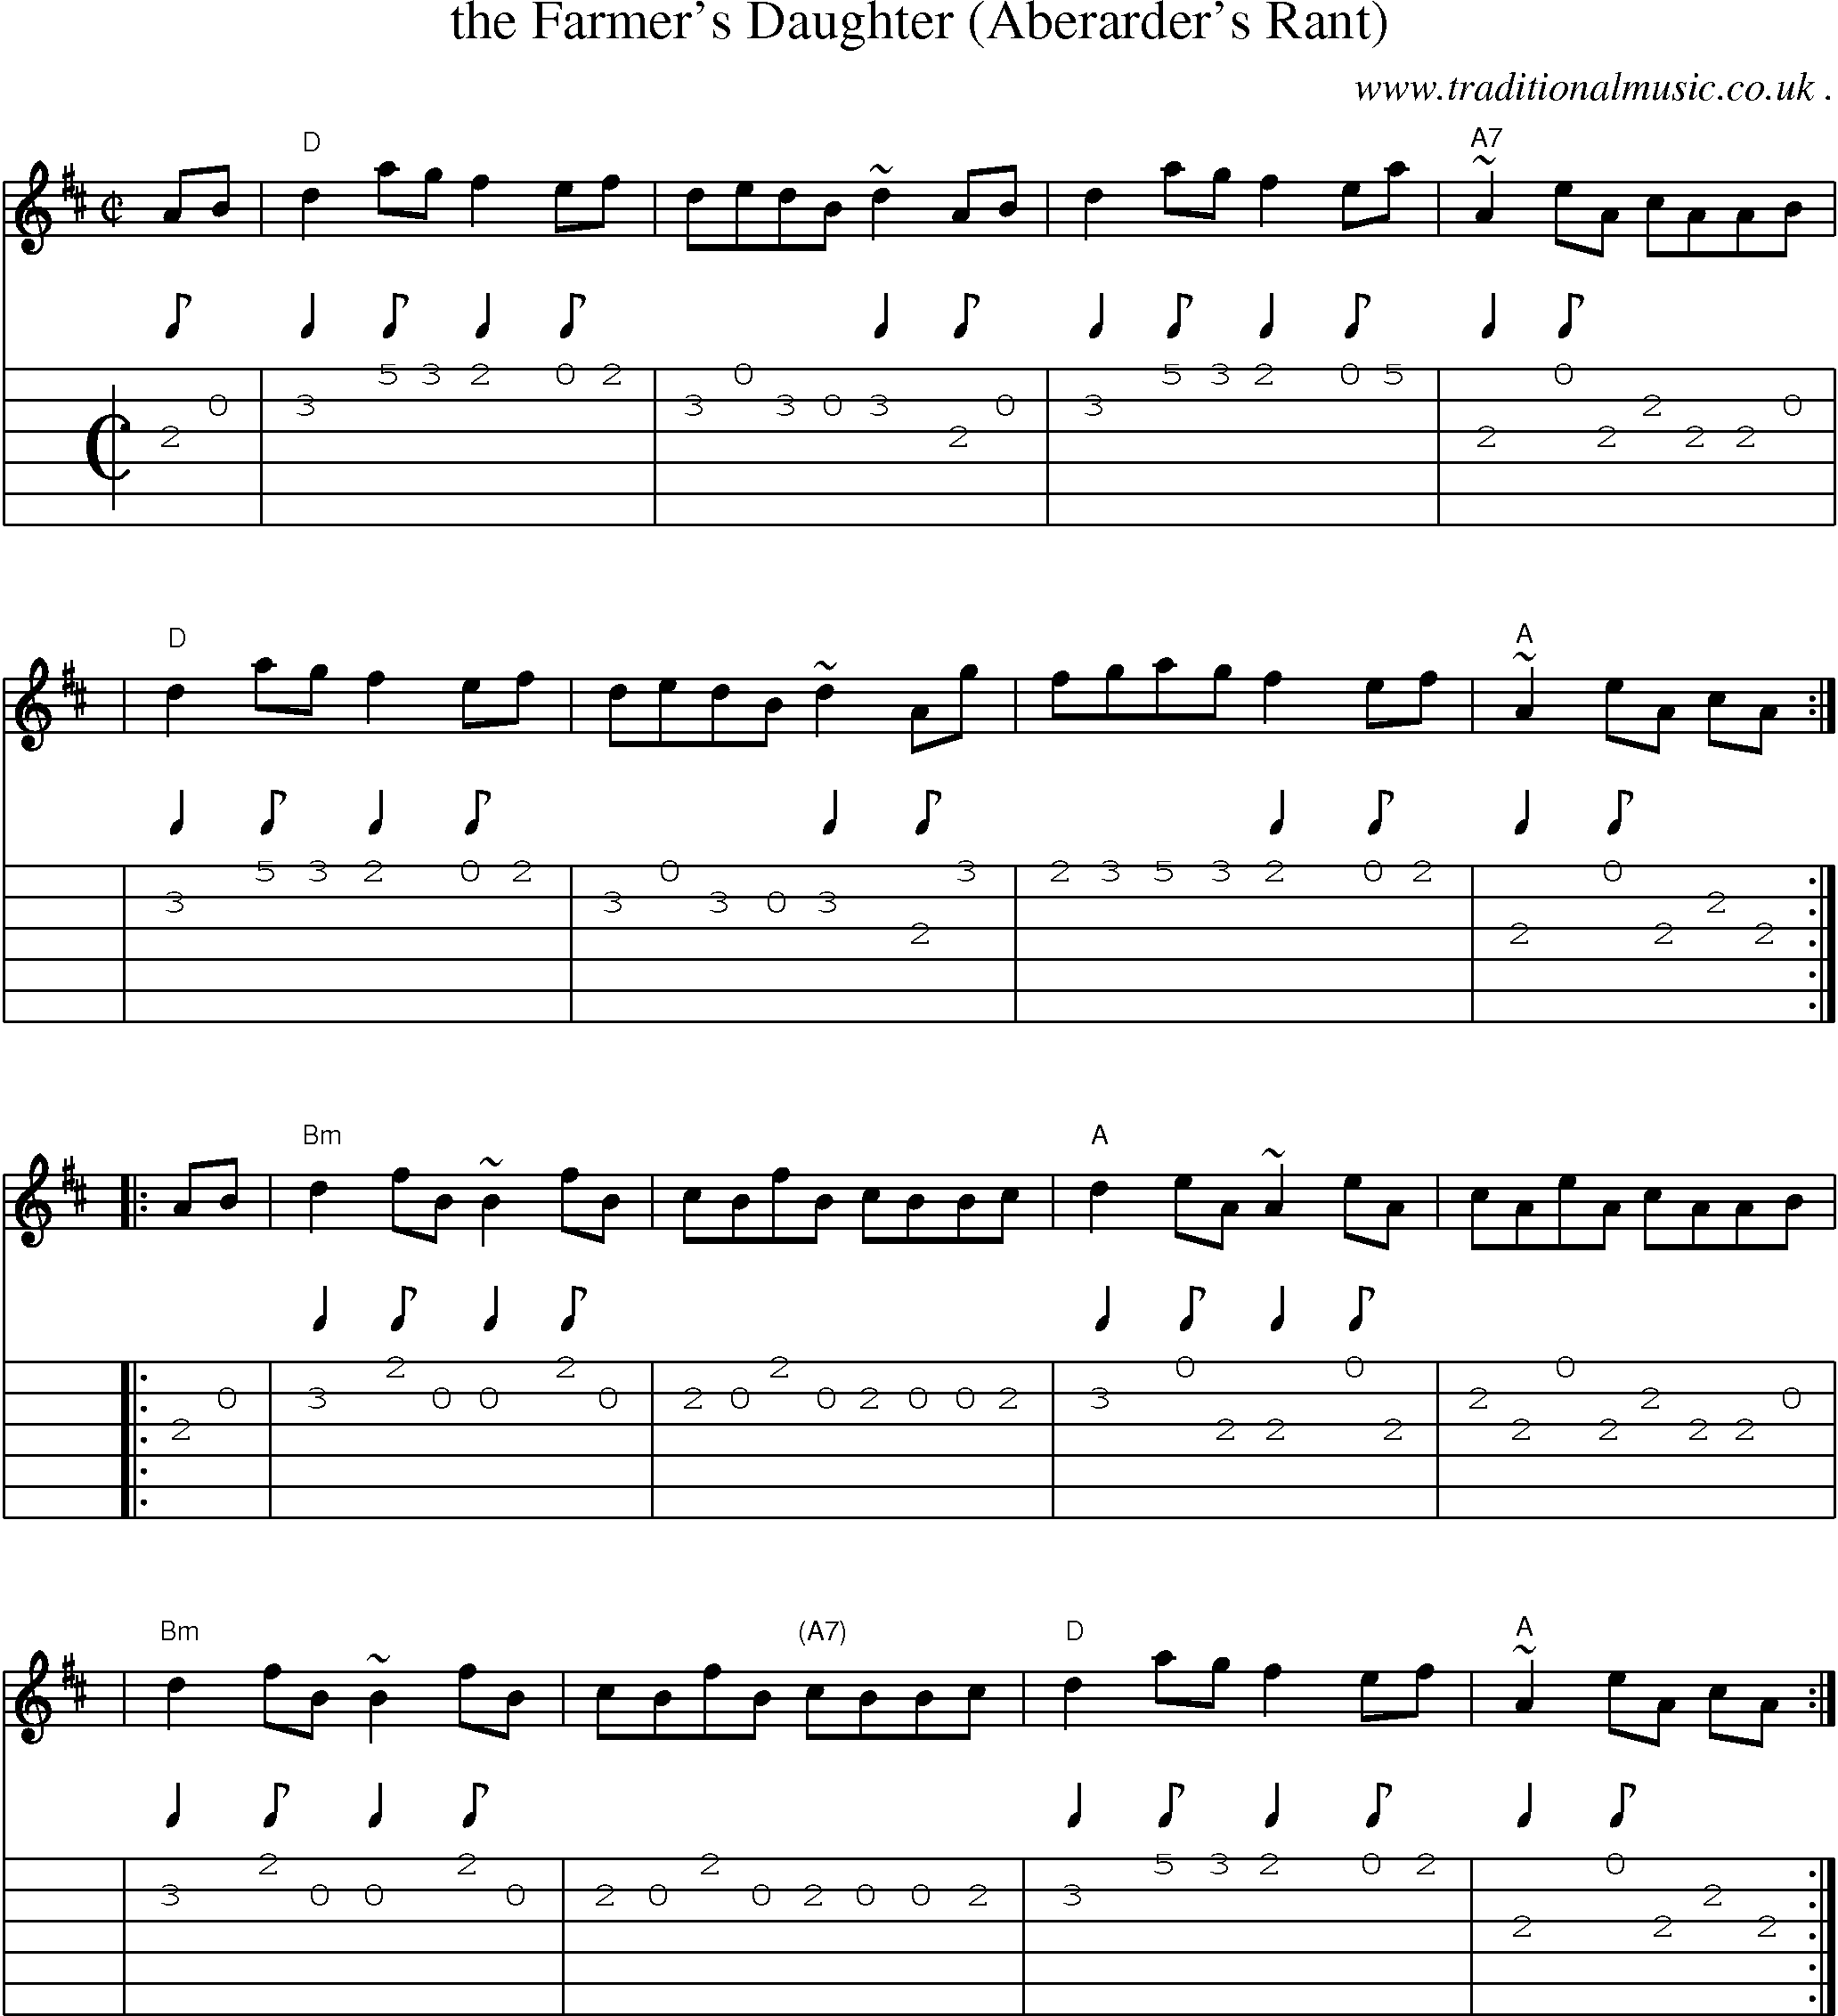 Sheet-music  score, Chords and Guitar Tabs for The Farmers Daughter Aberarders Rant